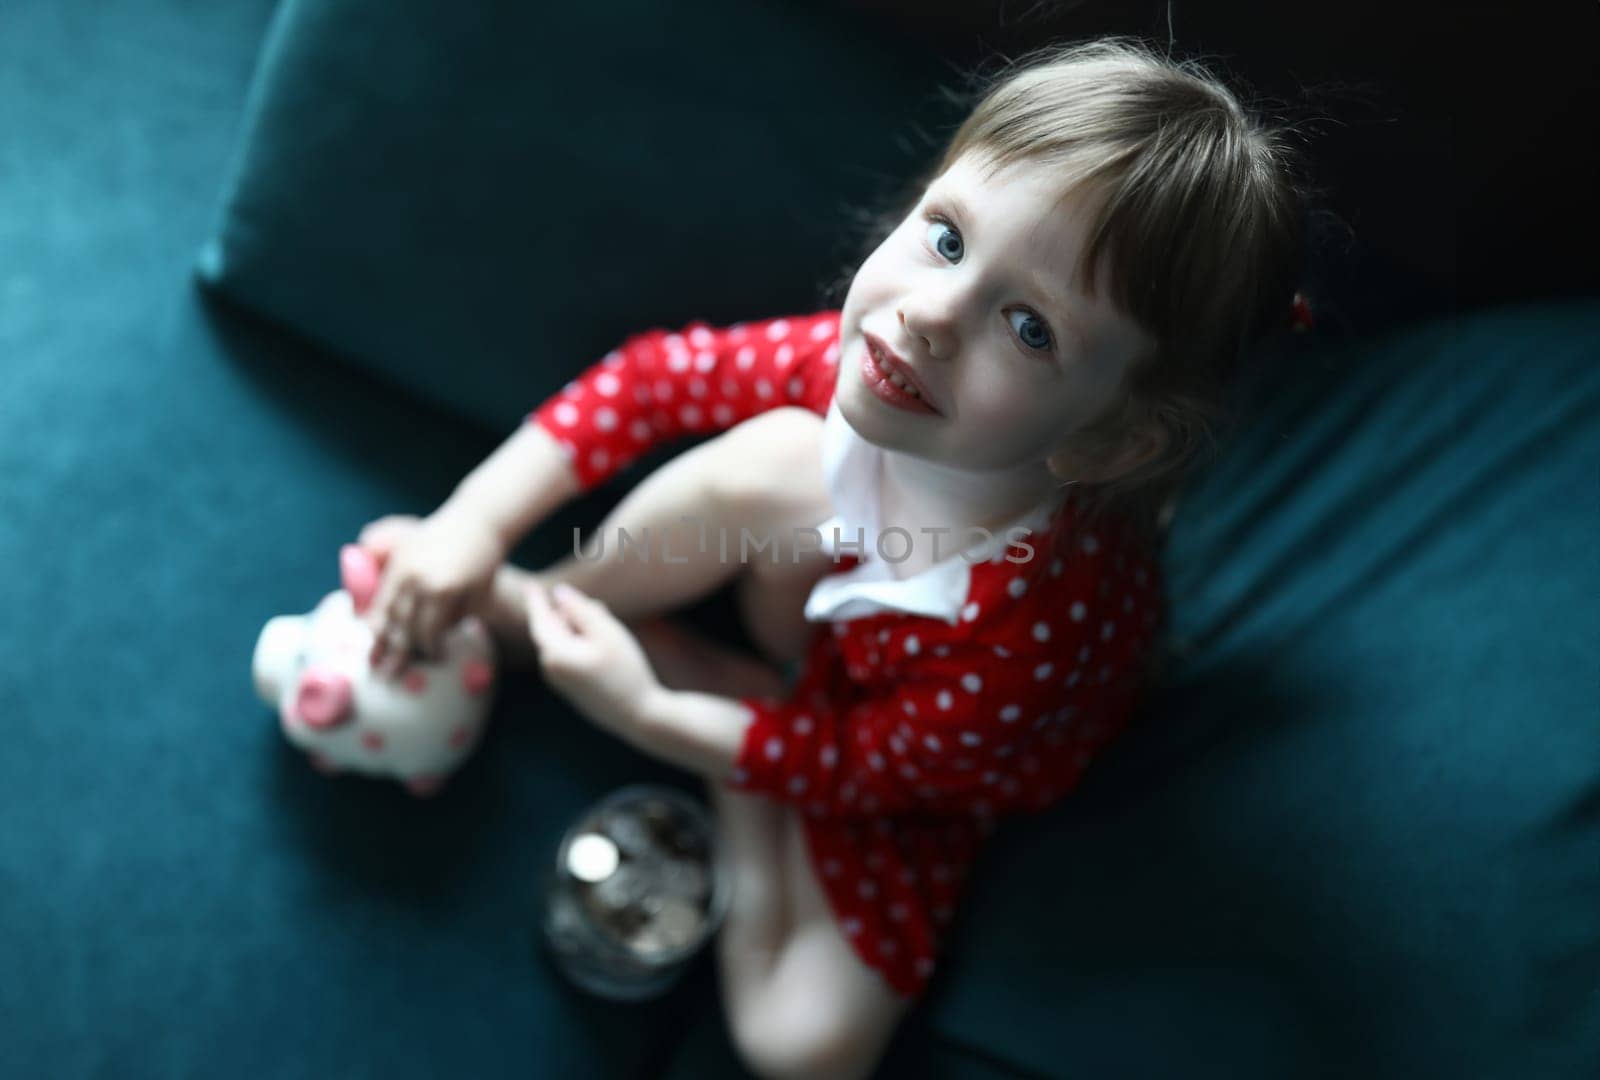 Top view carefree kid sitting on cozy sofa at home. Smiling beautiful girl wearing funny slippers. Child in pretty red dress in small dots. Childhood and happiness concept